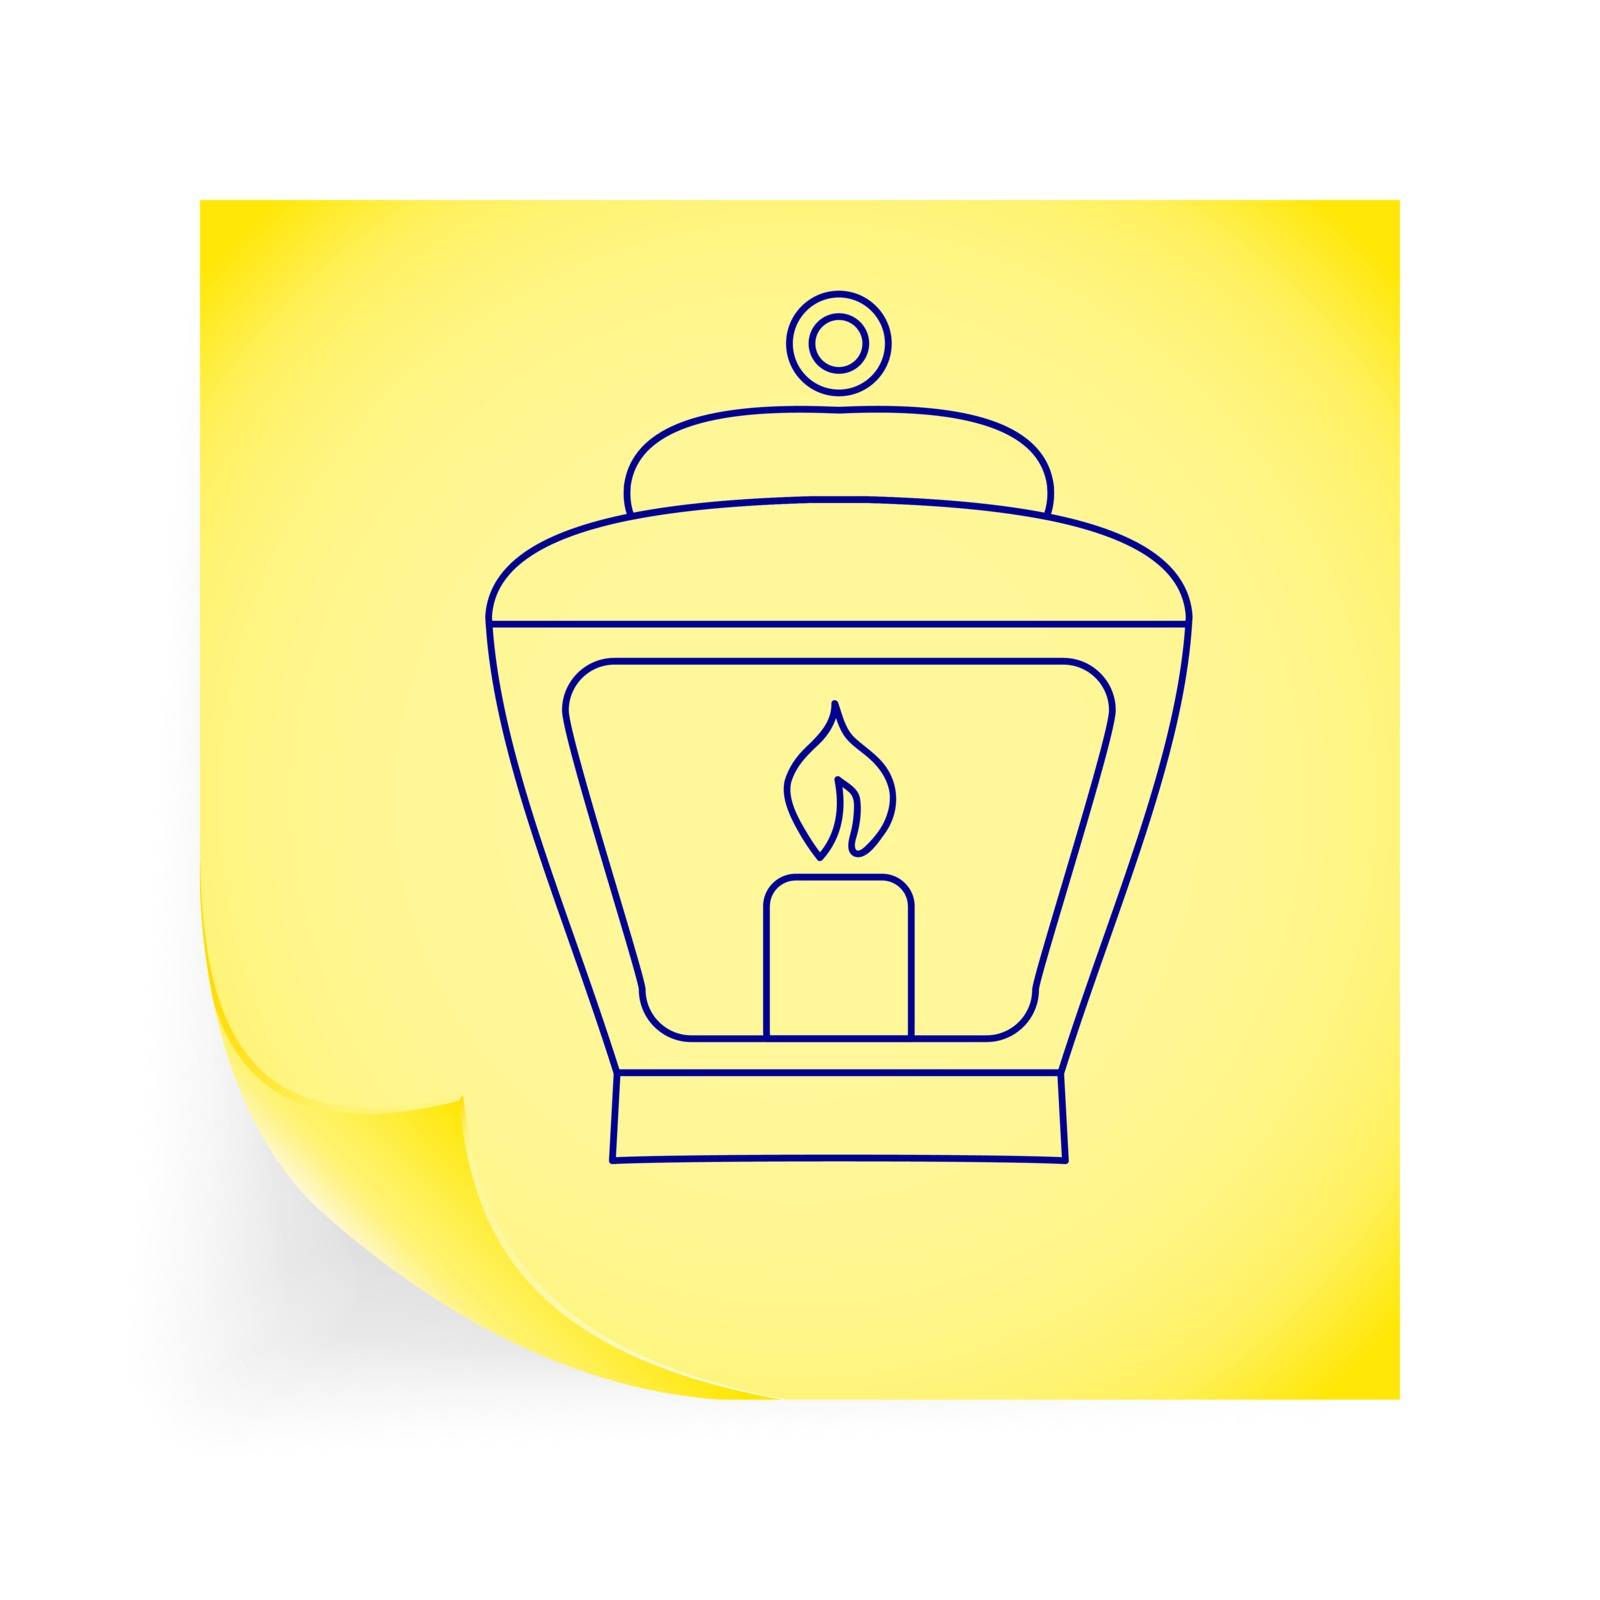 Old lantern. Single icon on the yellow note paper. Vector illustration.